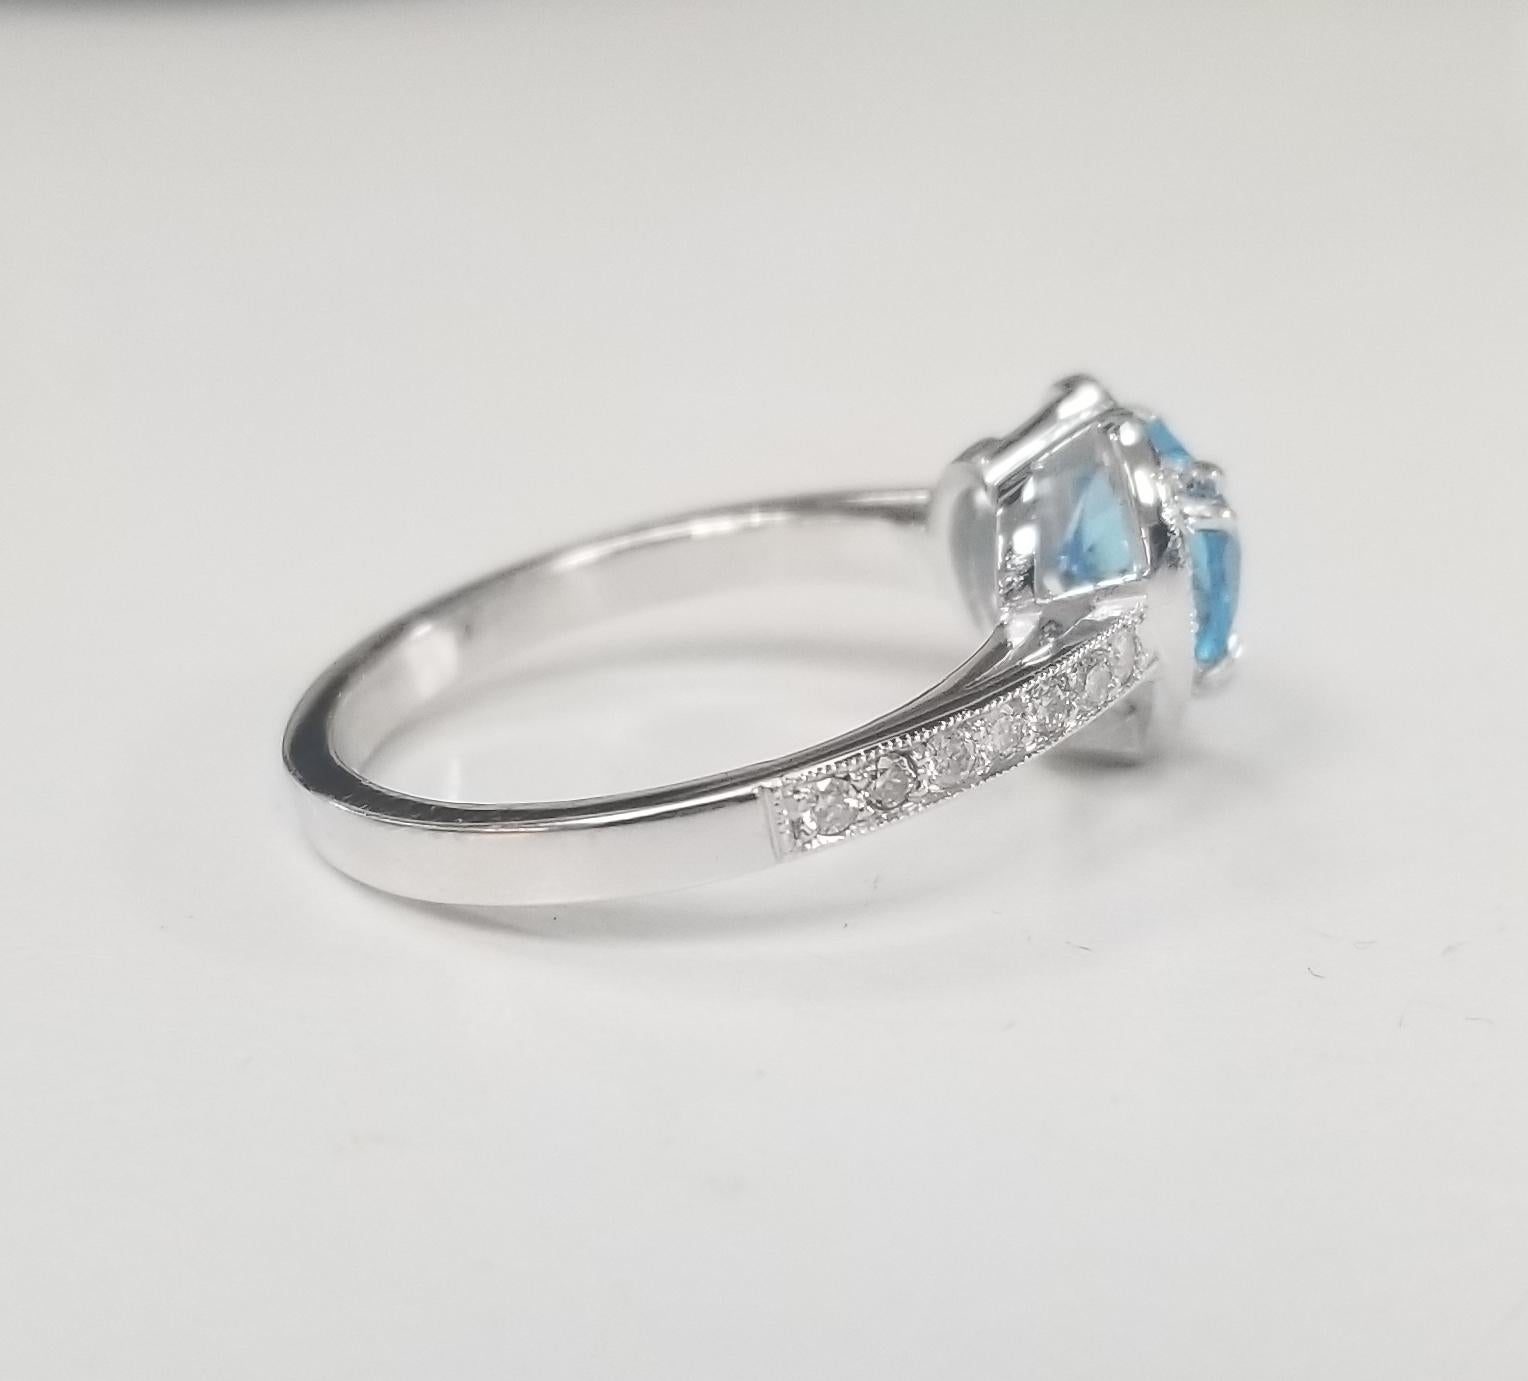 14k white gold Blue Topaz and Diamond Heart halo Ring, containing 1 heart shape cut pink sapphire of gem quality weighing 1.40cts. and 33 round full cut diamonds of very fine quality weighing .33pts.  This ring is a size 6.75 but we will size to fit